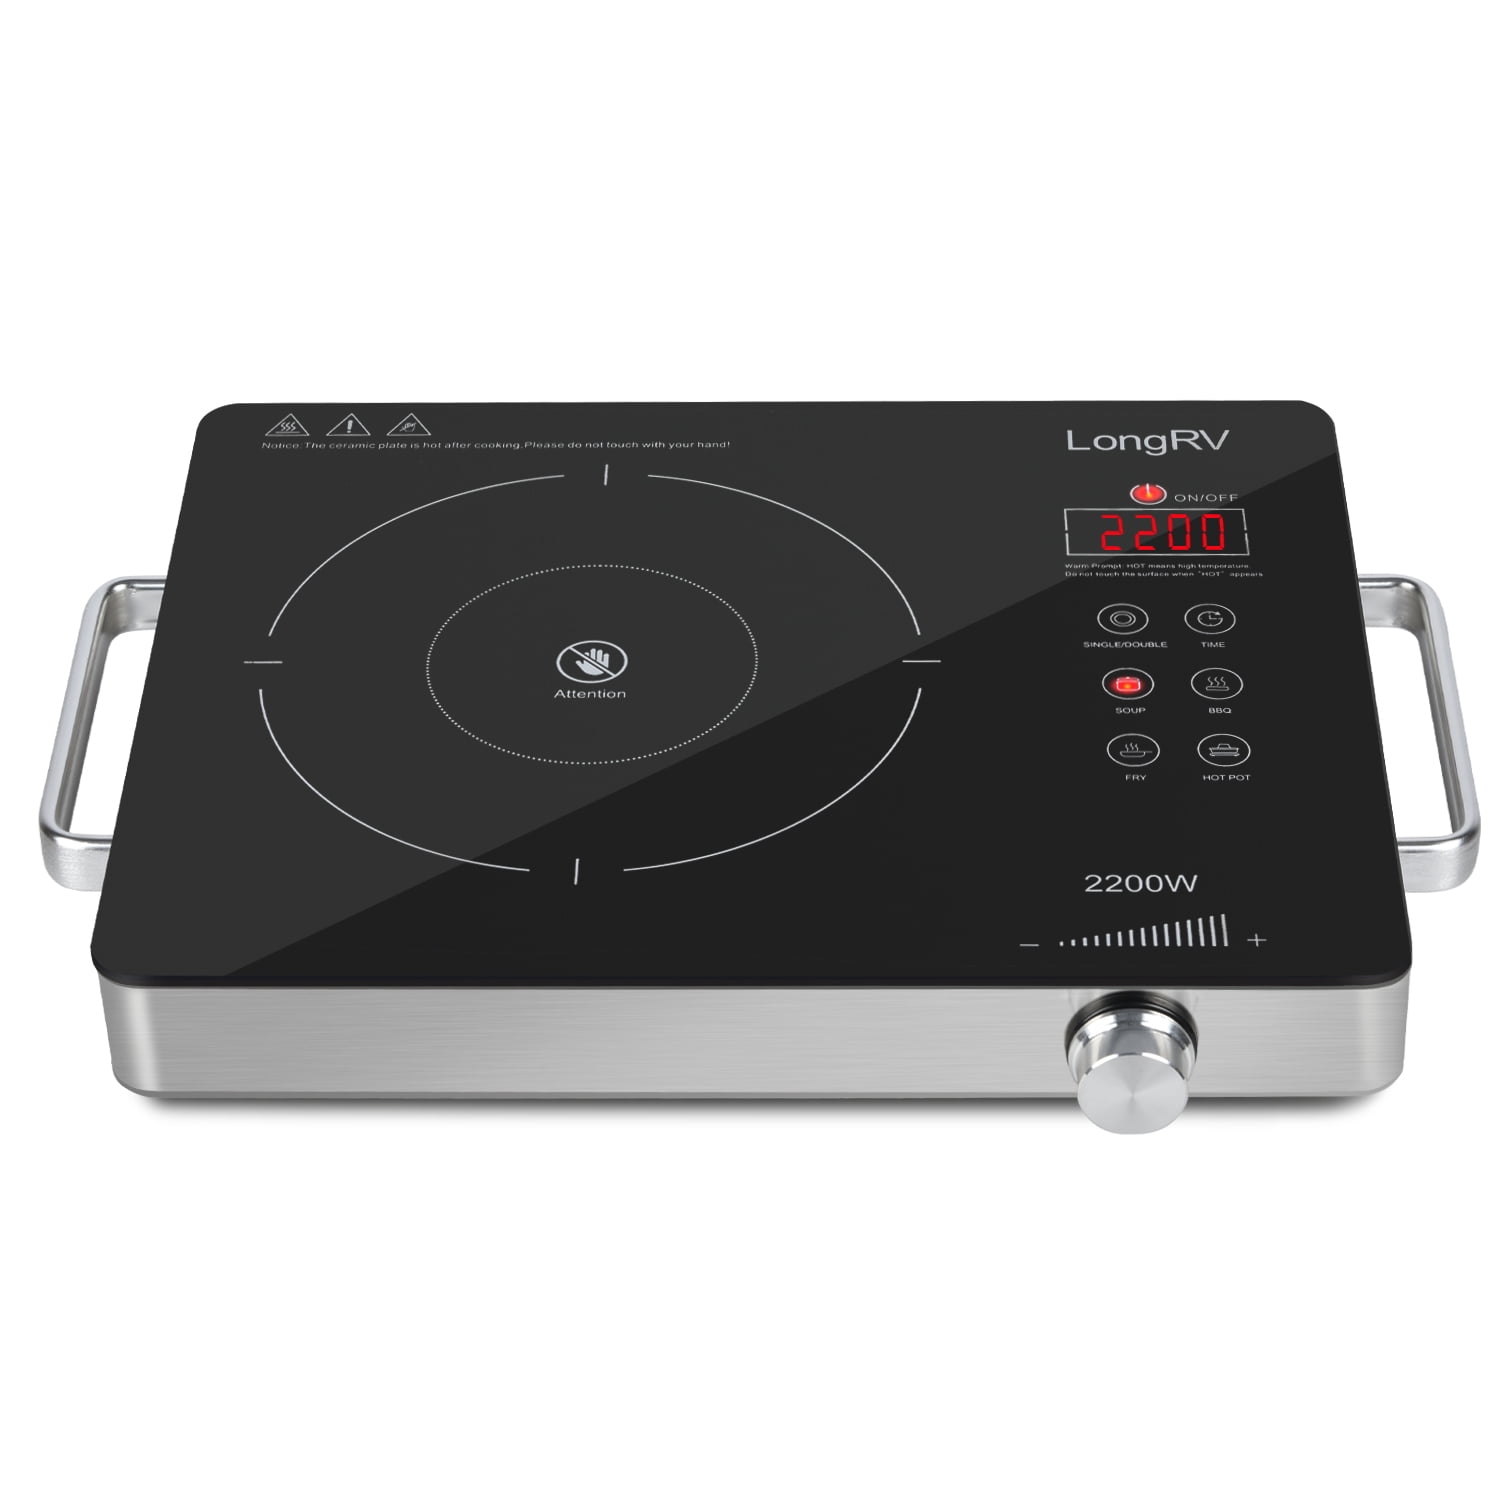 VEVOR Electric Cooktop, 5 Burners, 36'' Induction Stove Top, Built-In Magnetic Cooktop 9200W, 9 Heating Level Multifunctional Burner, LED Touch